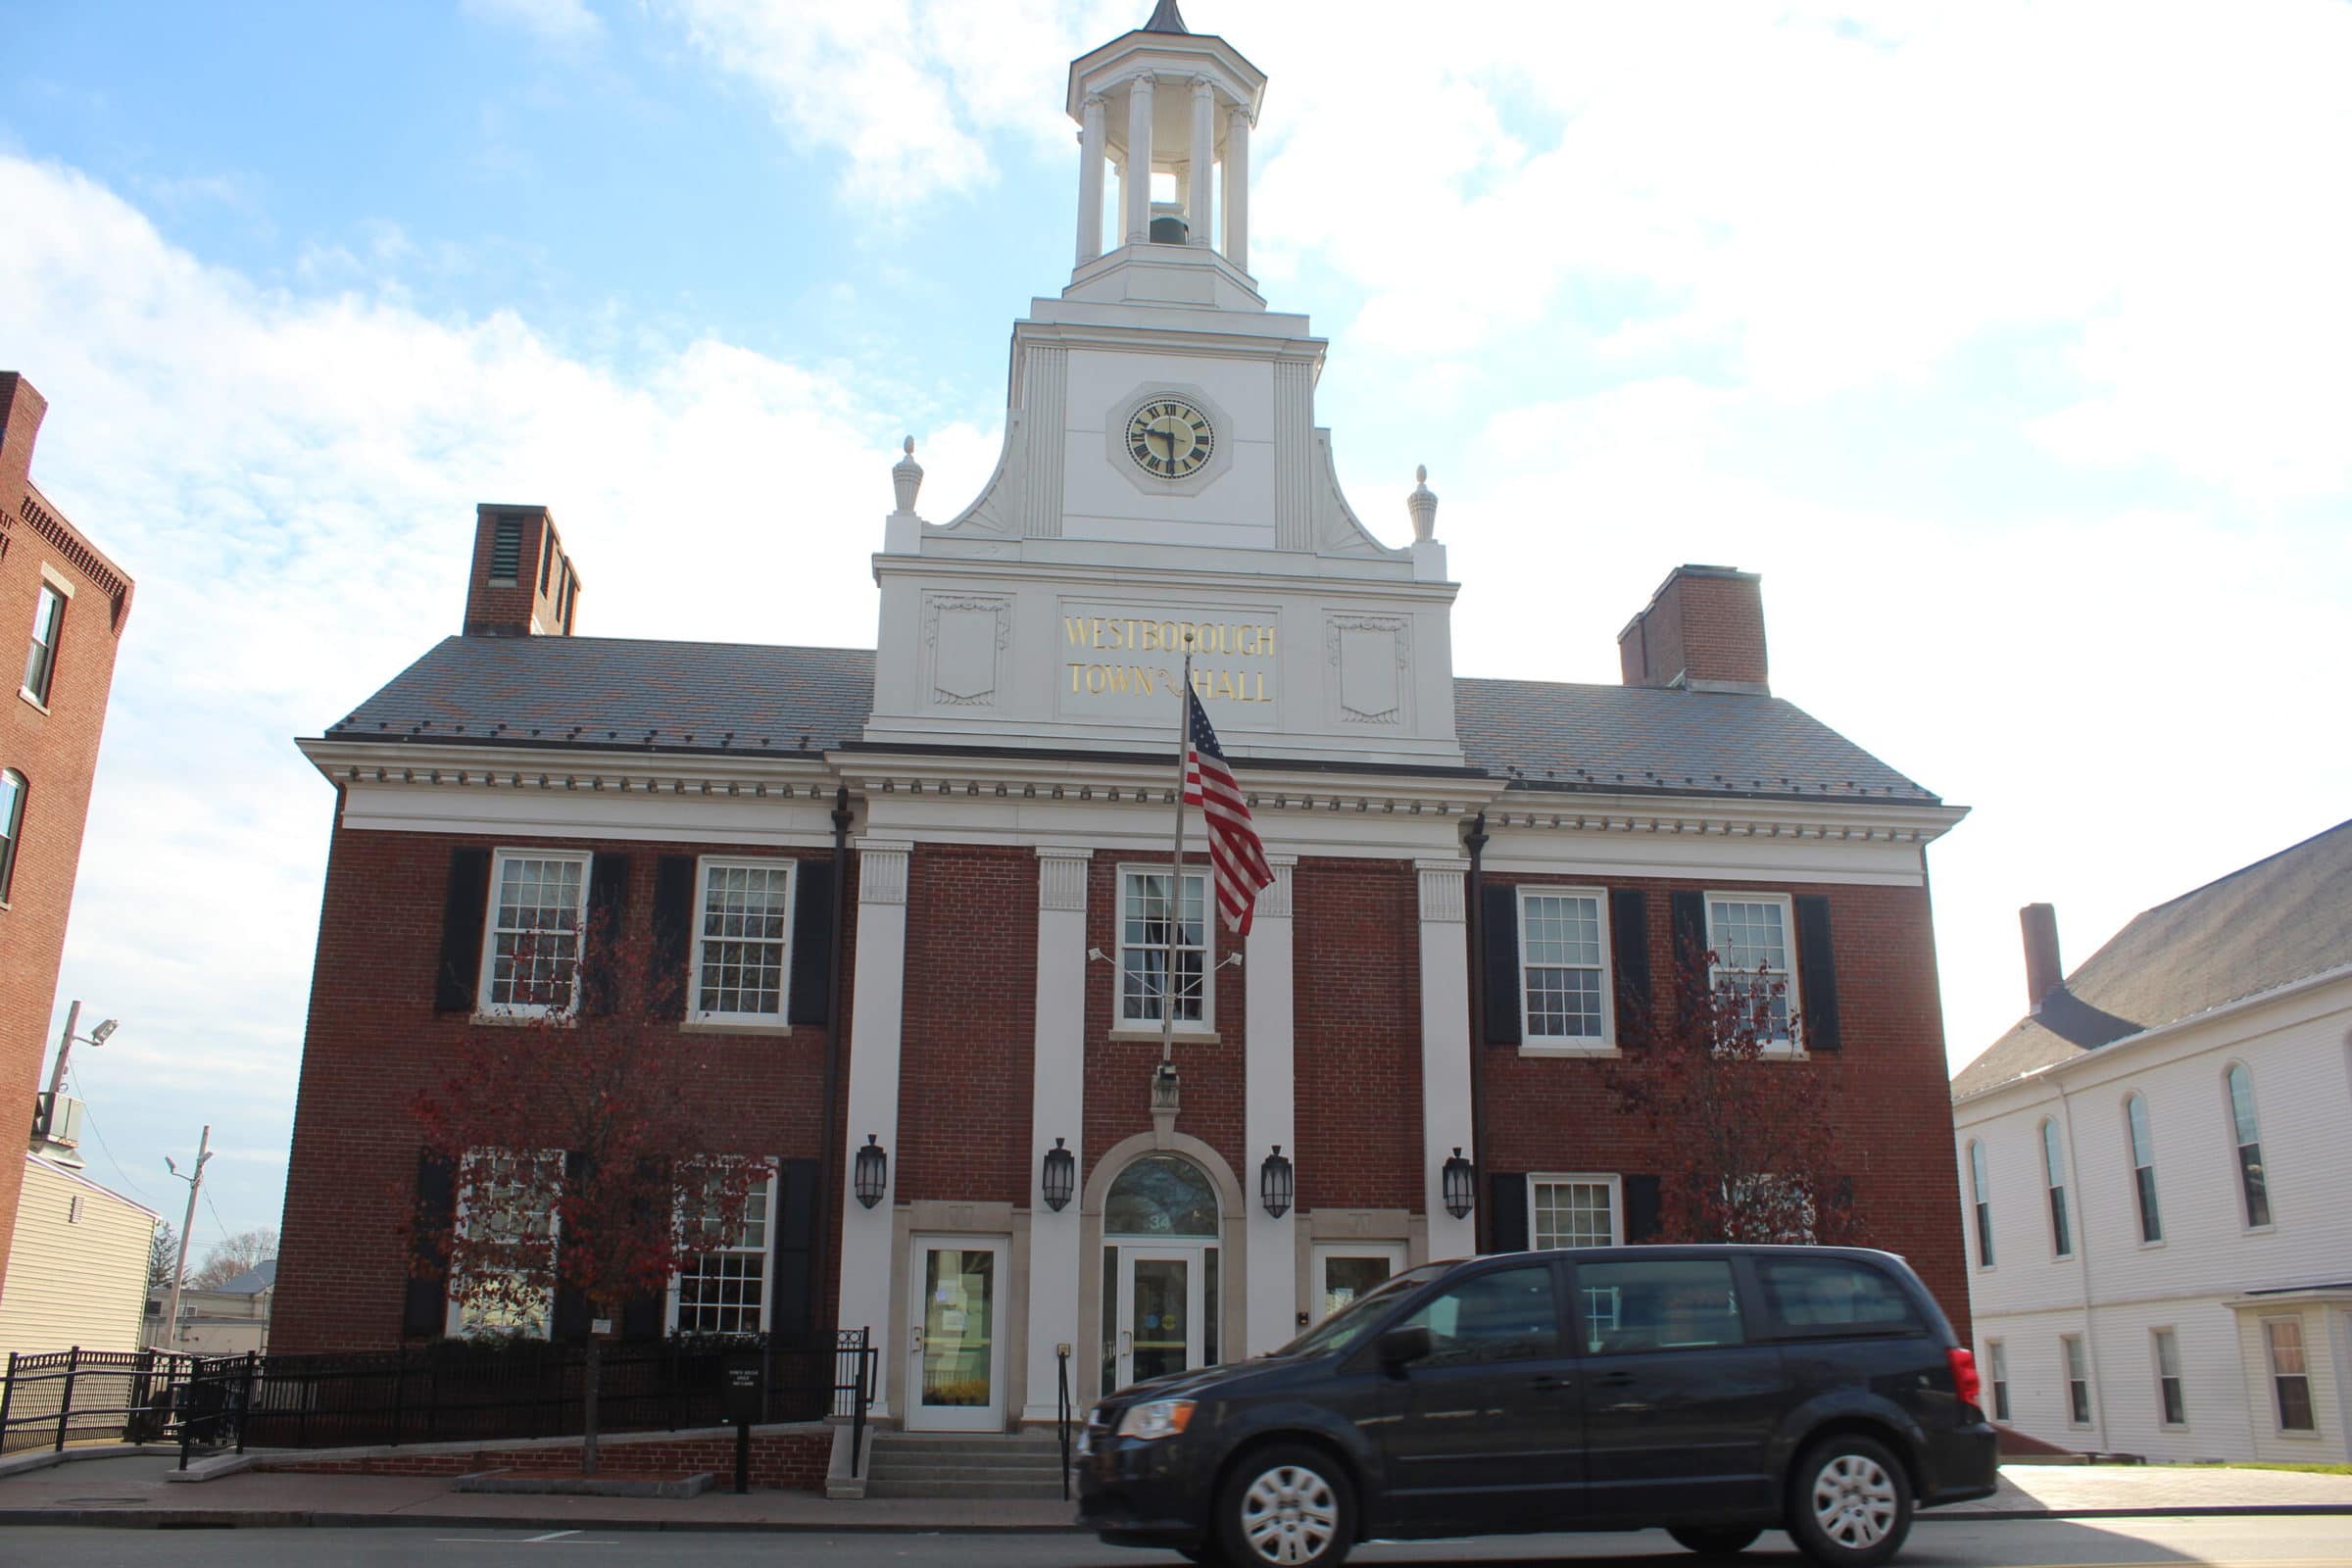 Changes coming to Westborough’s Finance Department